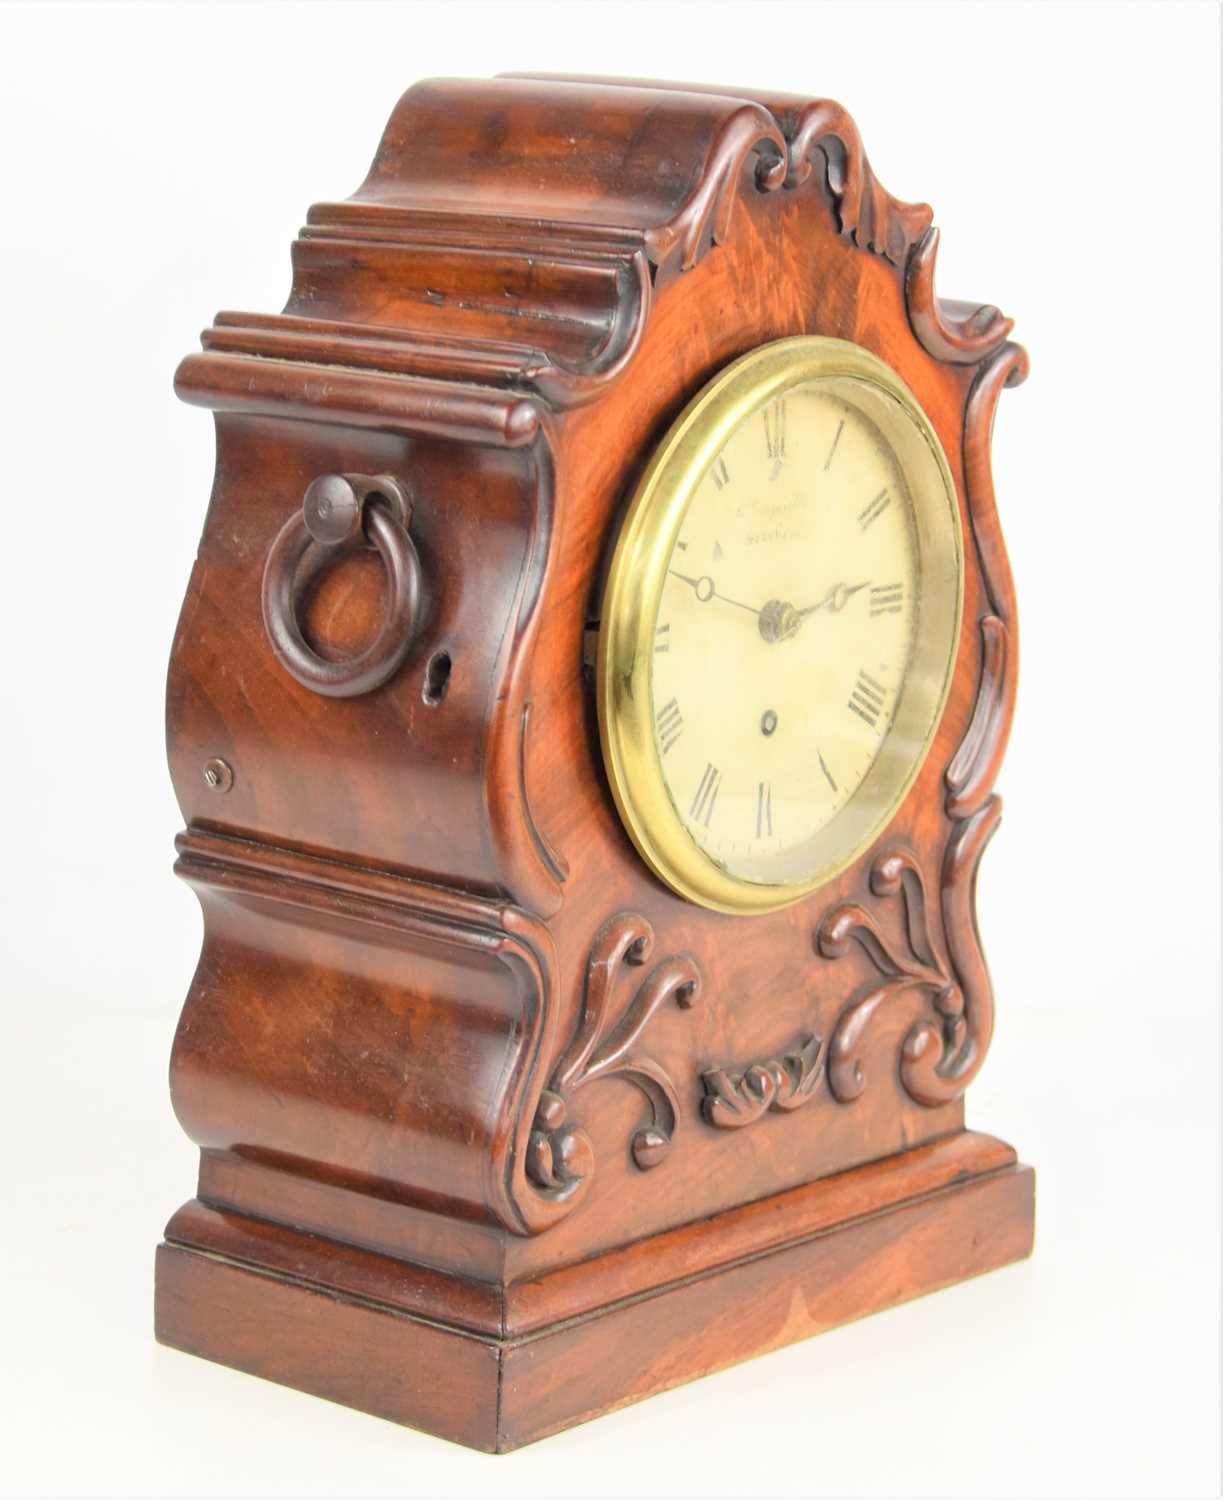 A mid 19th century J. Vassalli of Scarbro bracket clock in a carved mahogany case, single fusee - Image 2 of 3